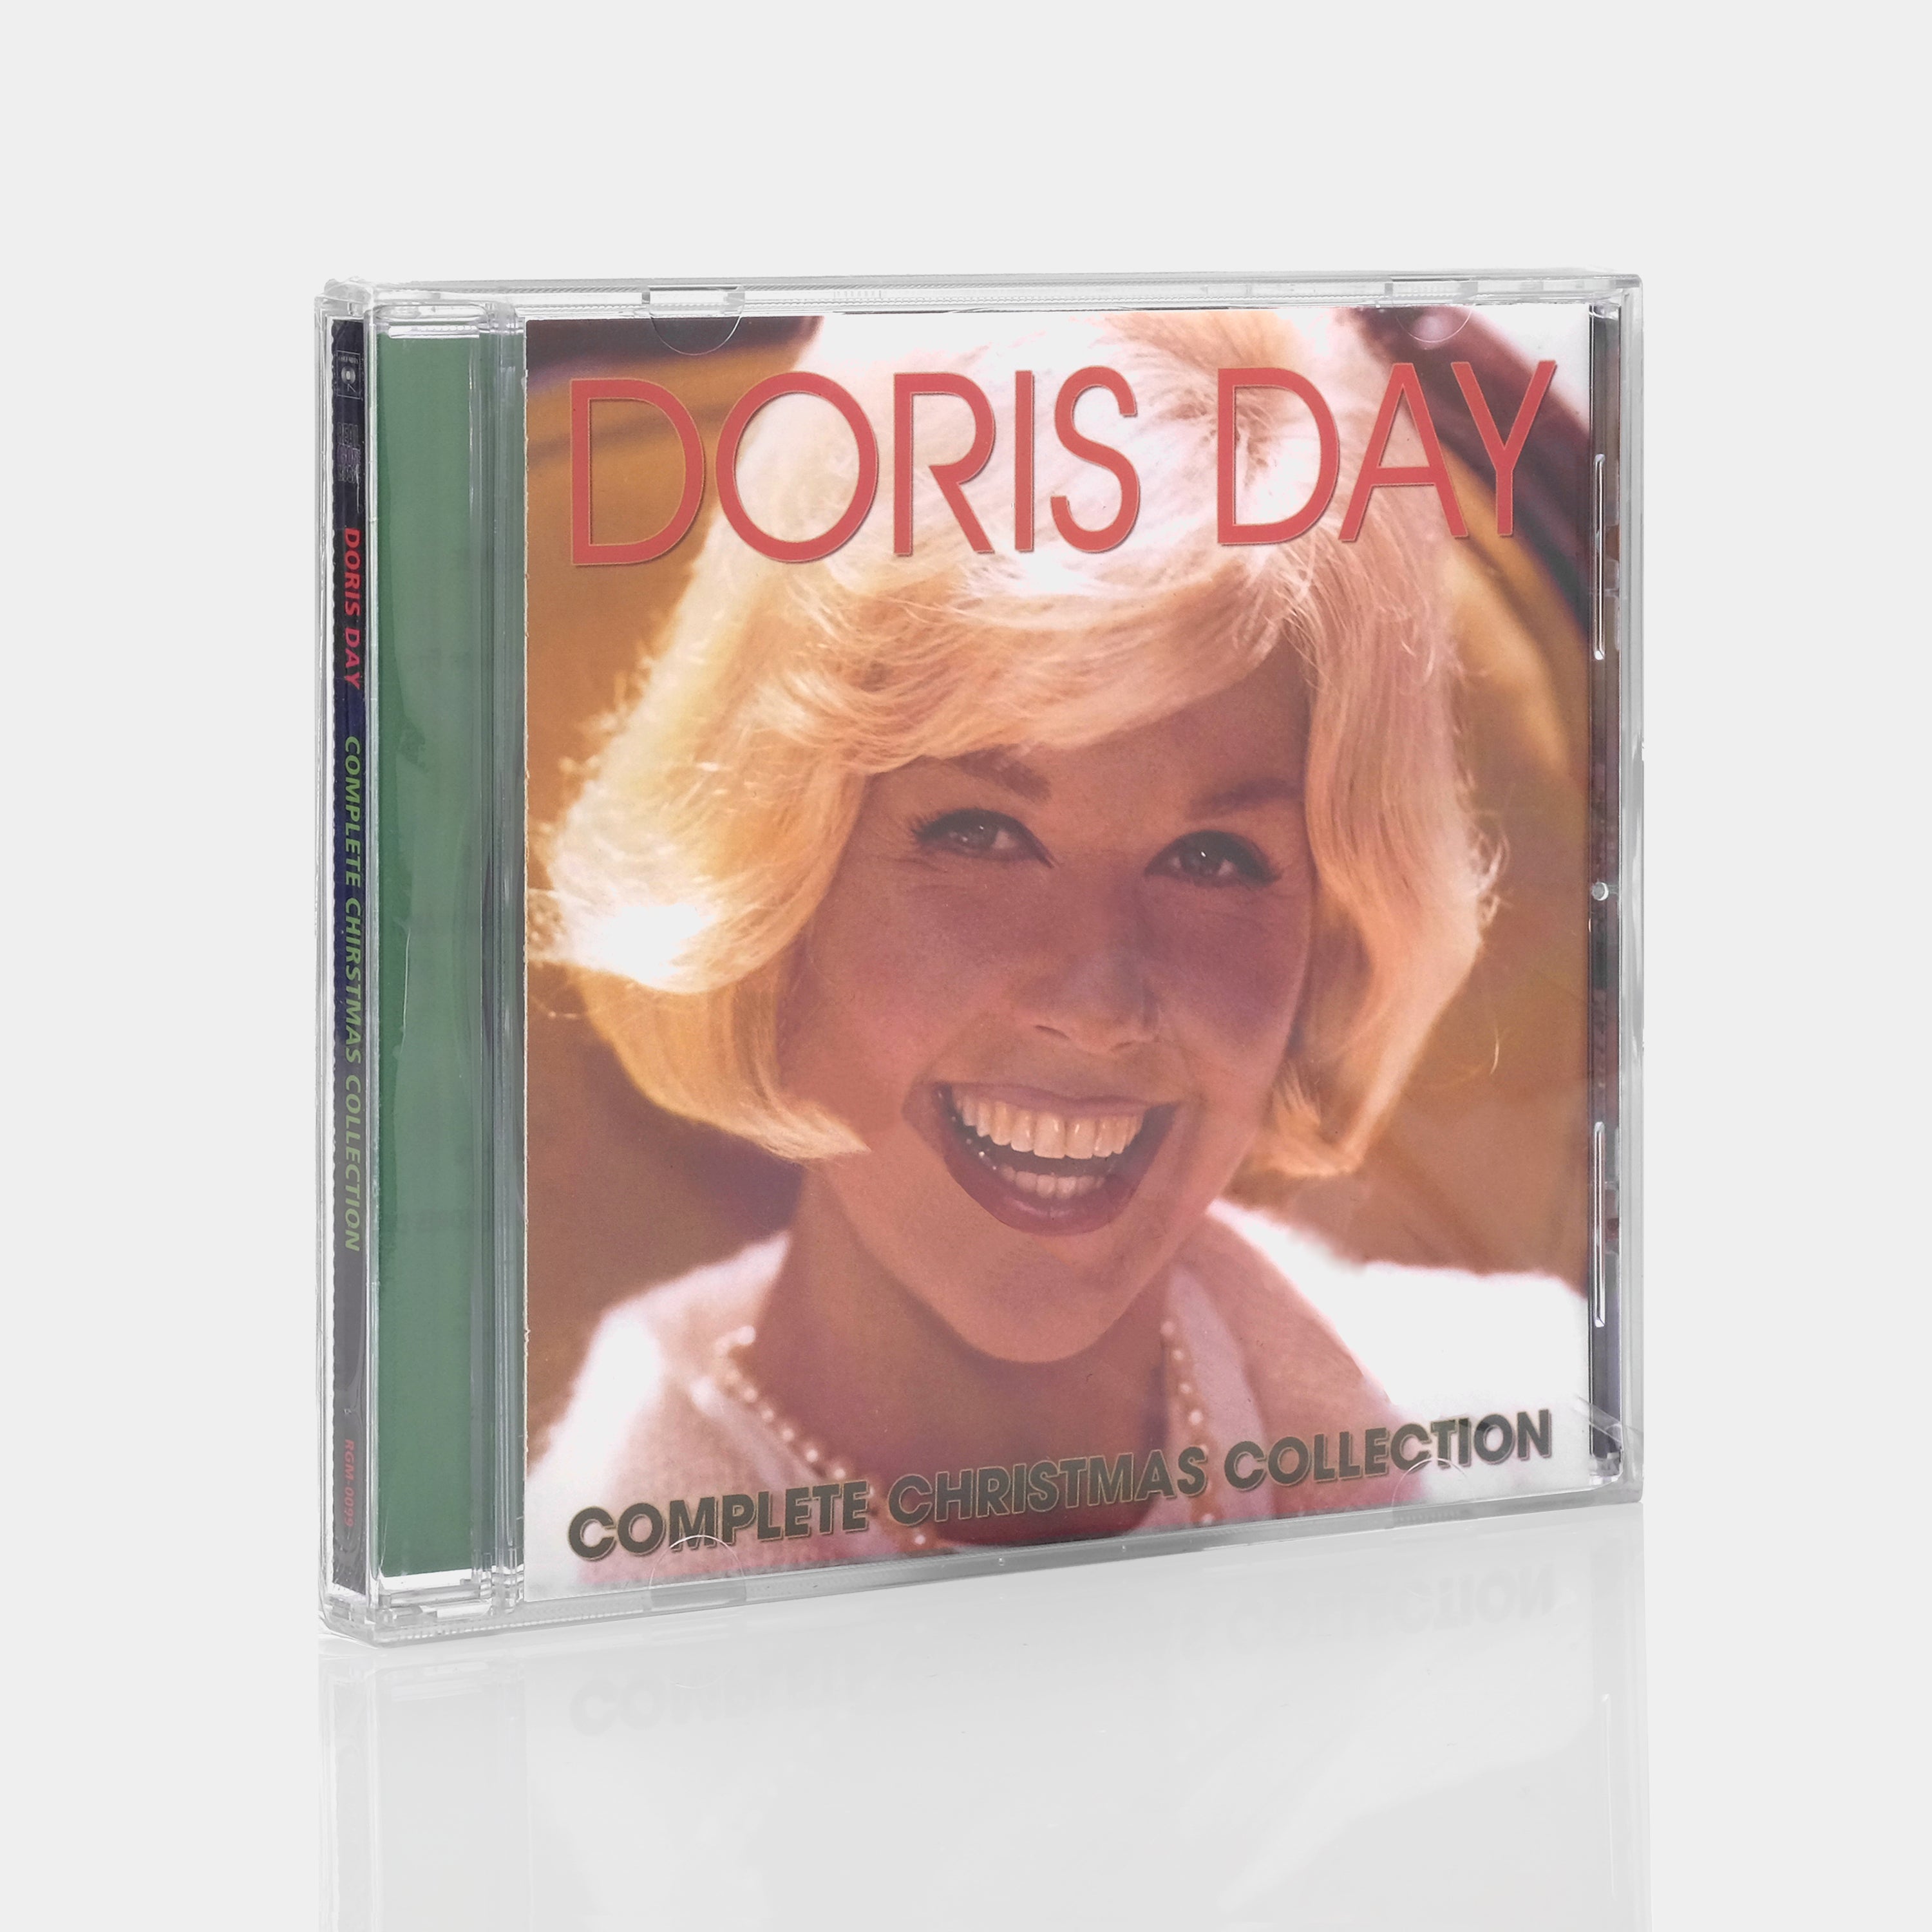 Doris Day - Complete Christmas Collection CD